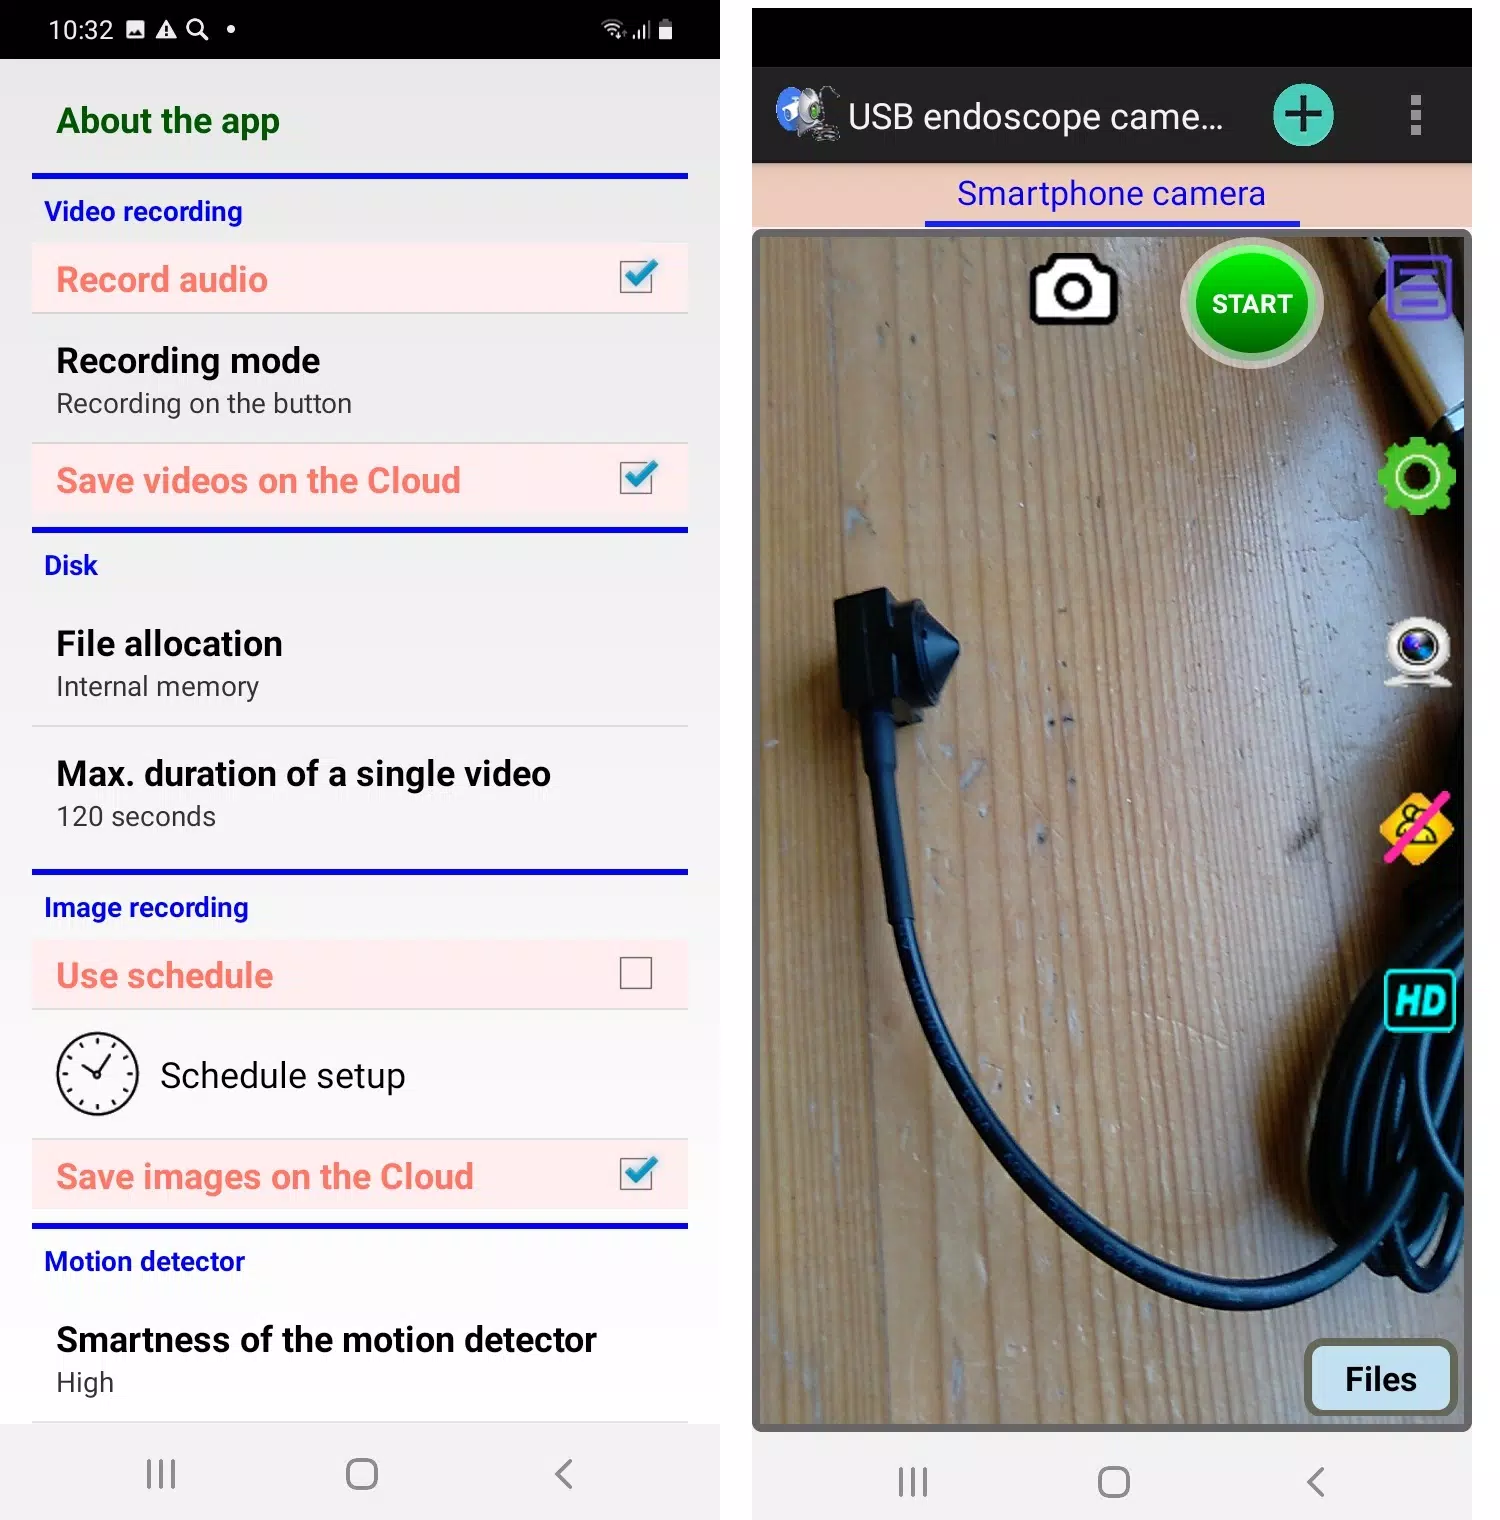 USB OTG camera, Endoscope app for Android - APK Download